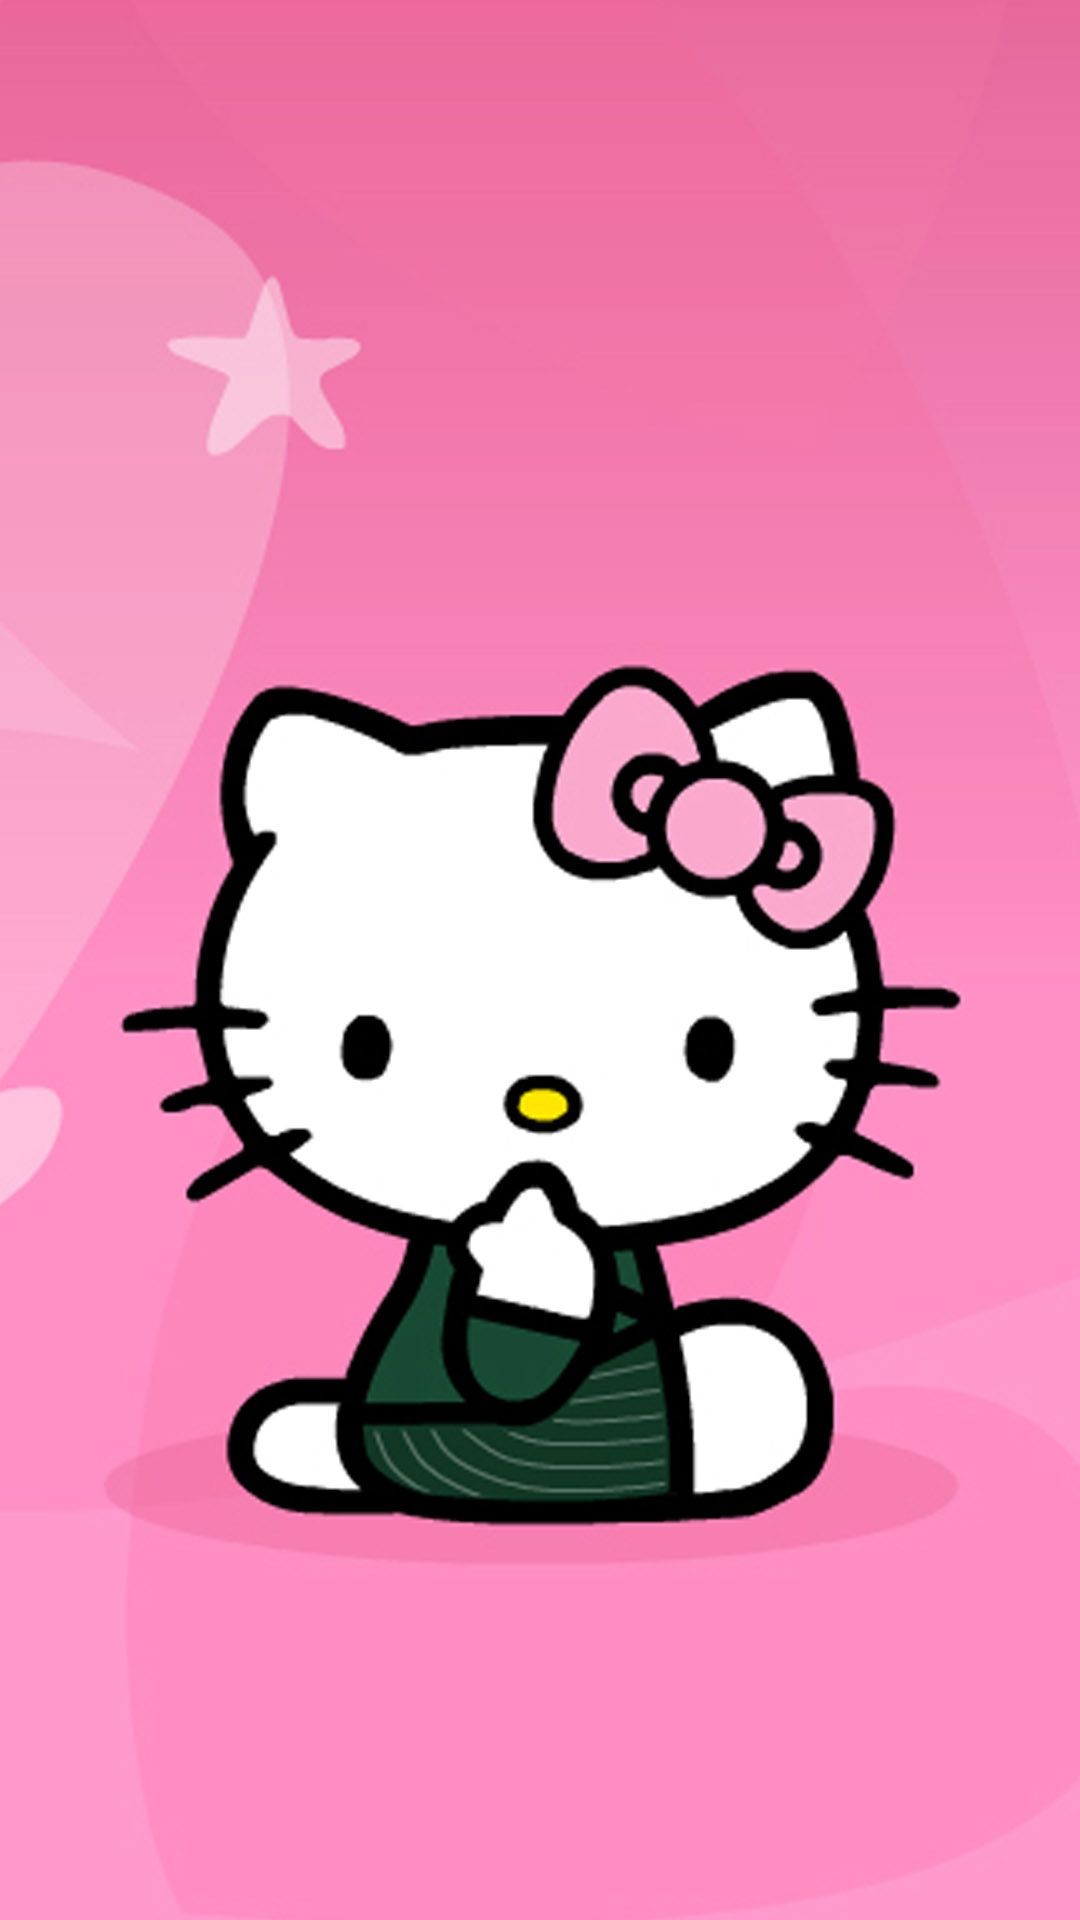 1080x1920 ... Hello Kitty Live Wallpaper For Computer 38. Download